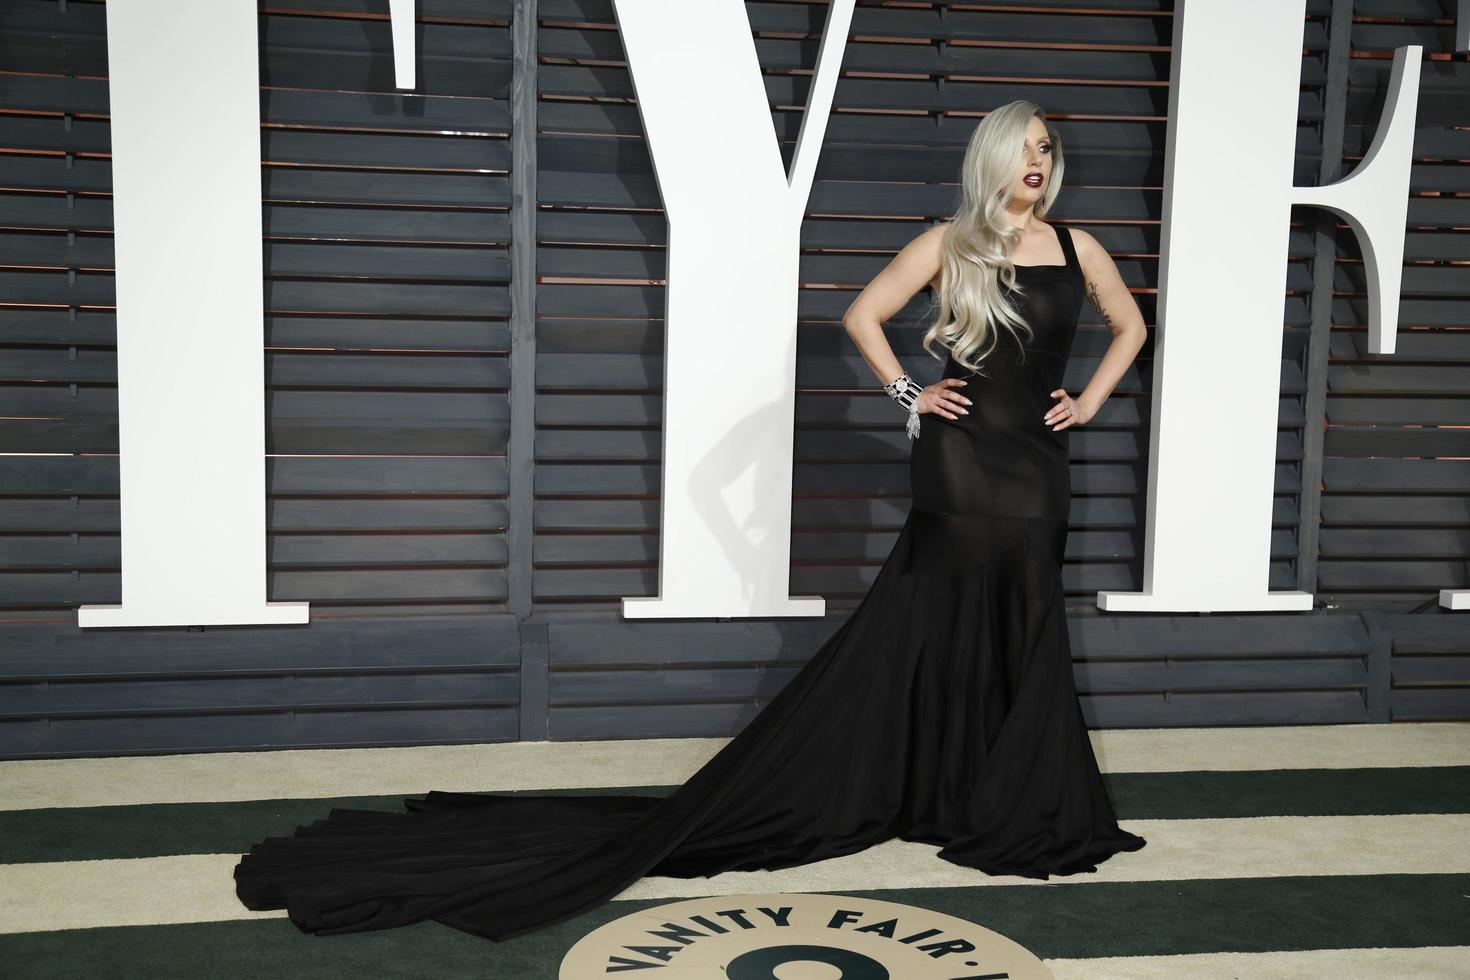 LOS ANGELES, FEB 22 - Lady Gaga at the Vanity Fair Oscar Party 2015 at the Wallis Annenberg Center for the Performing Arts on February 22, 2015 in Beverly Hills, CA photo